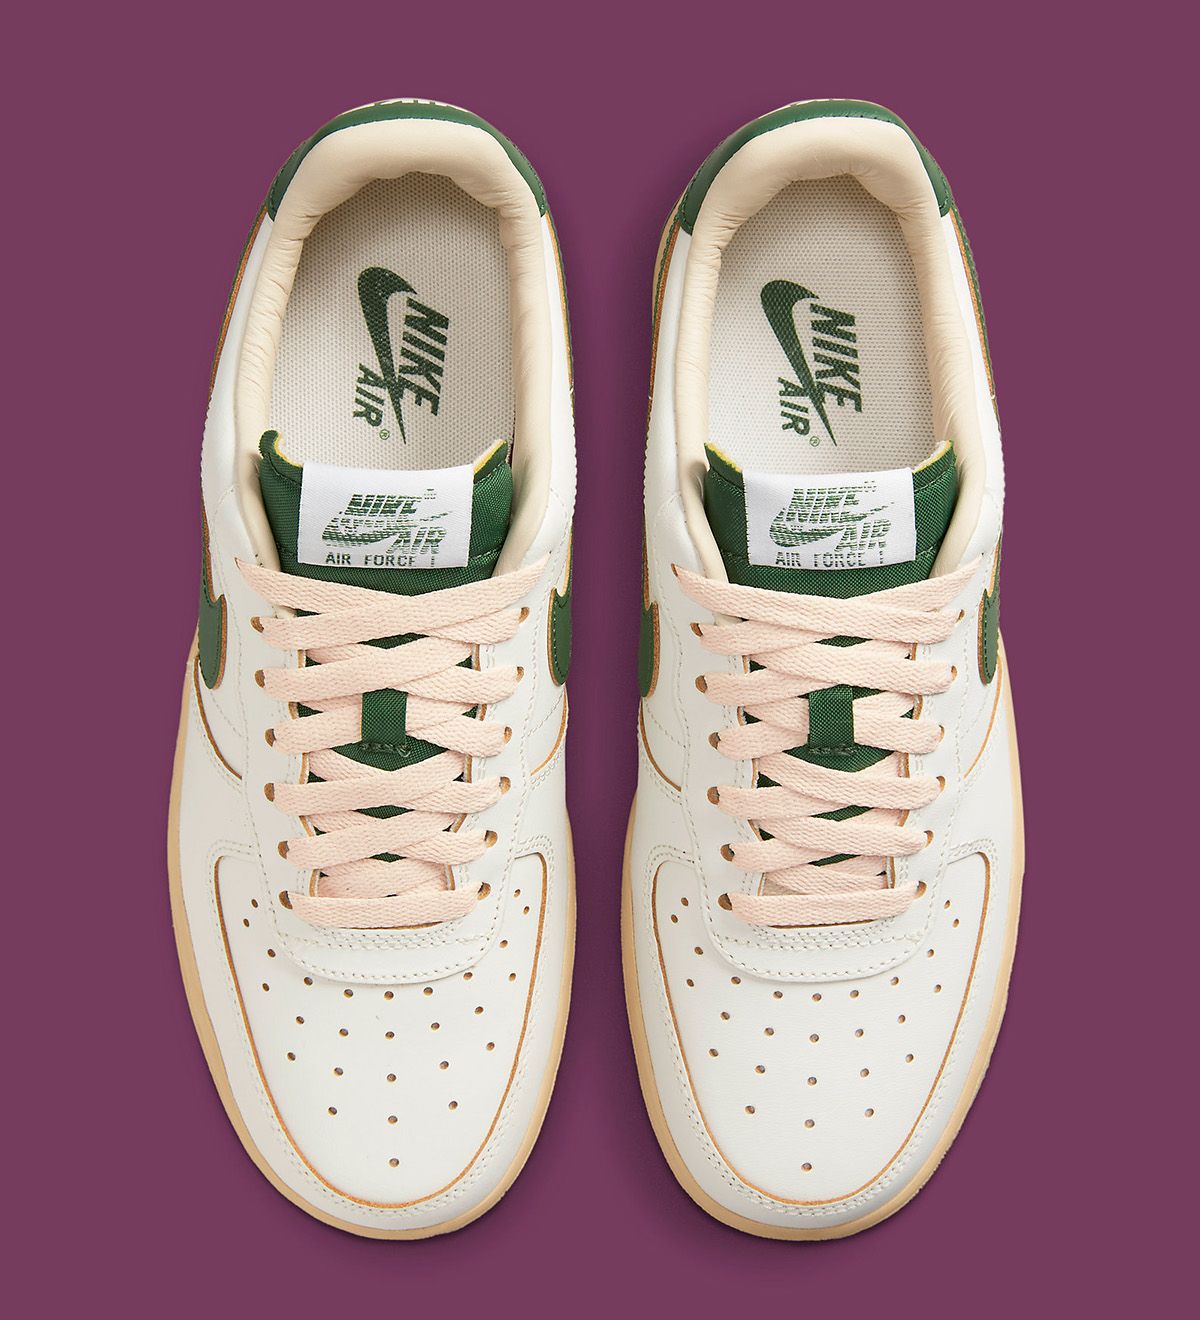 Aged-Look Air Force 1 Low Appears with Green and Muslin Accents ...